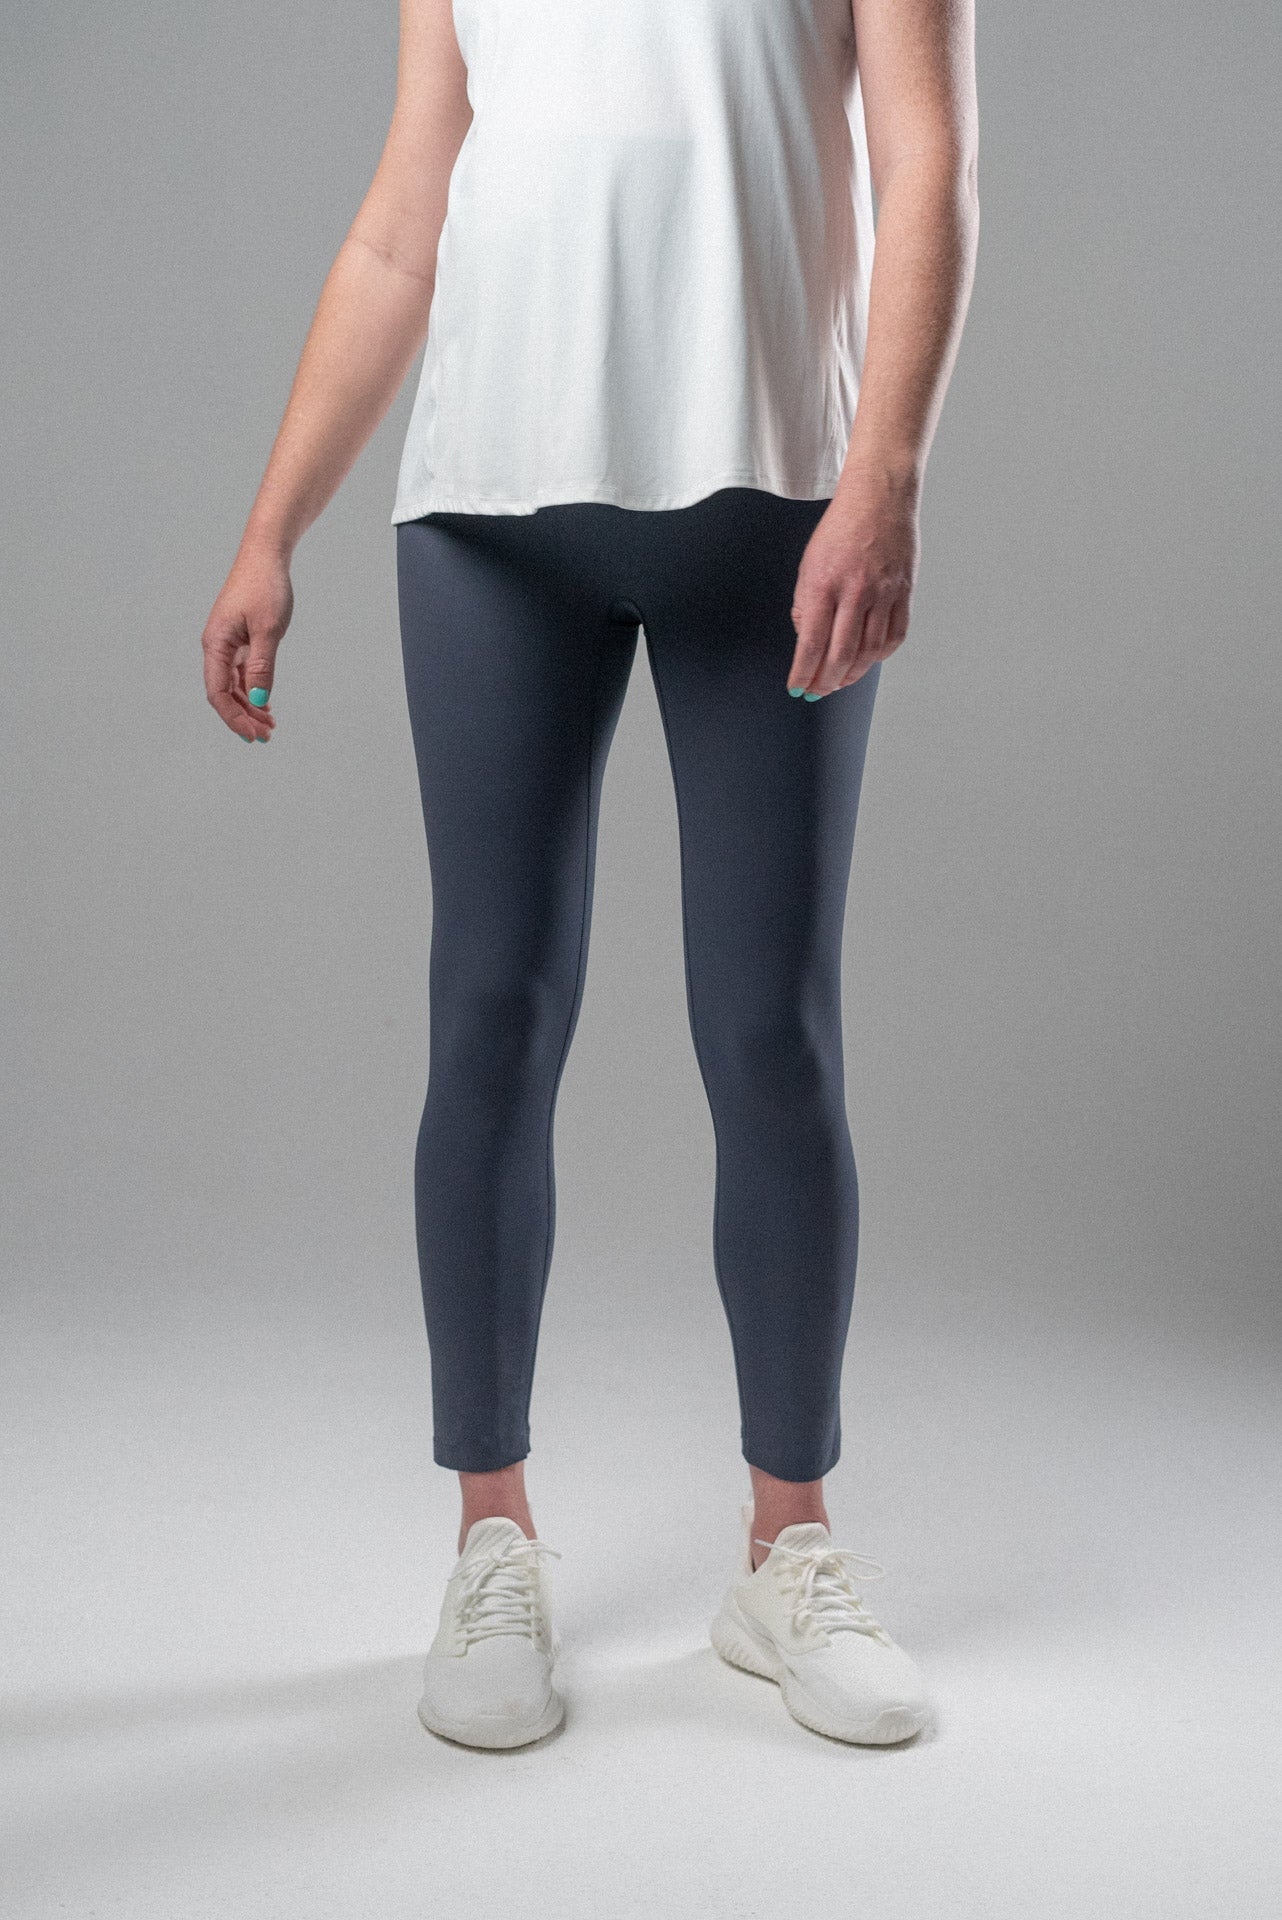 SOLD* Lululemon Zone In Tight 27”  Leggings are not pants, Tights, Pants  for women